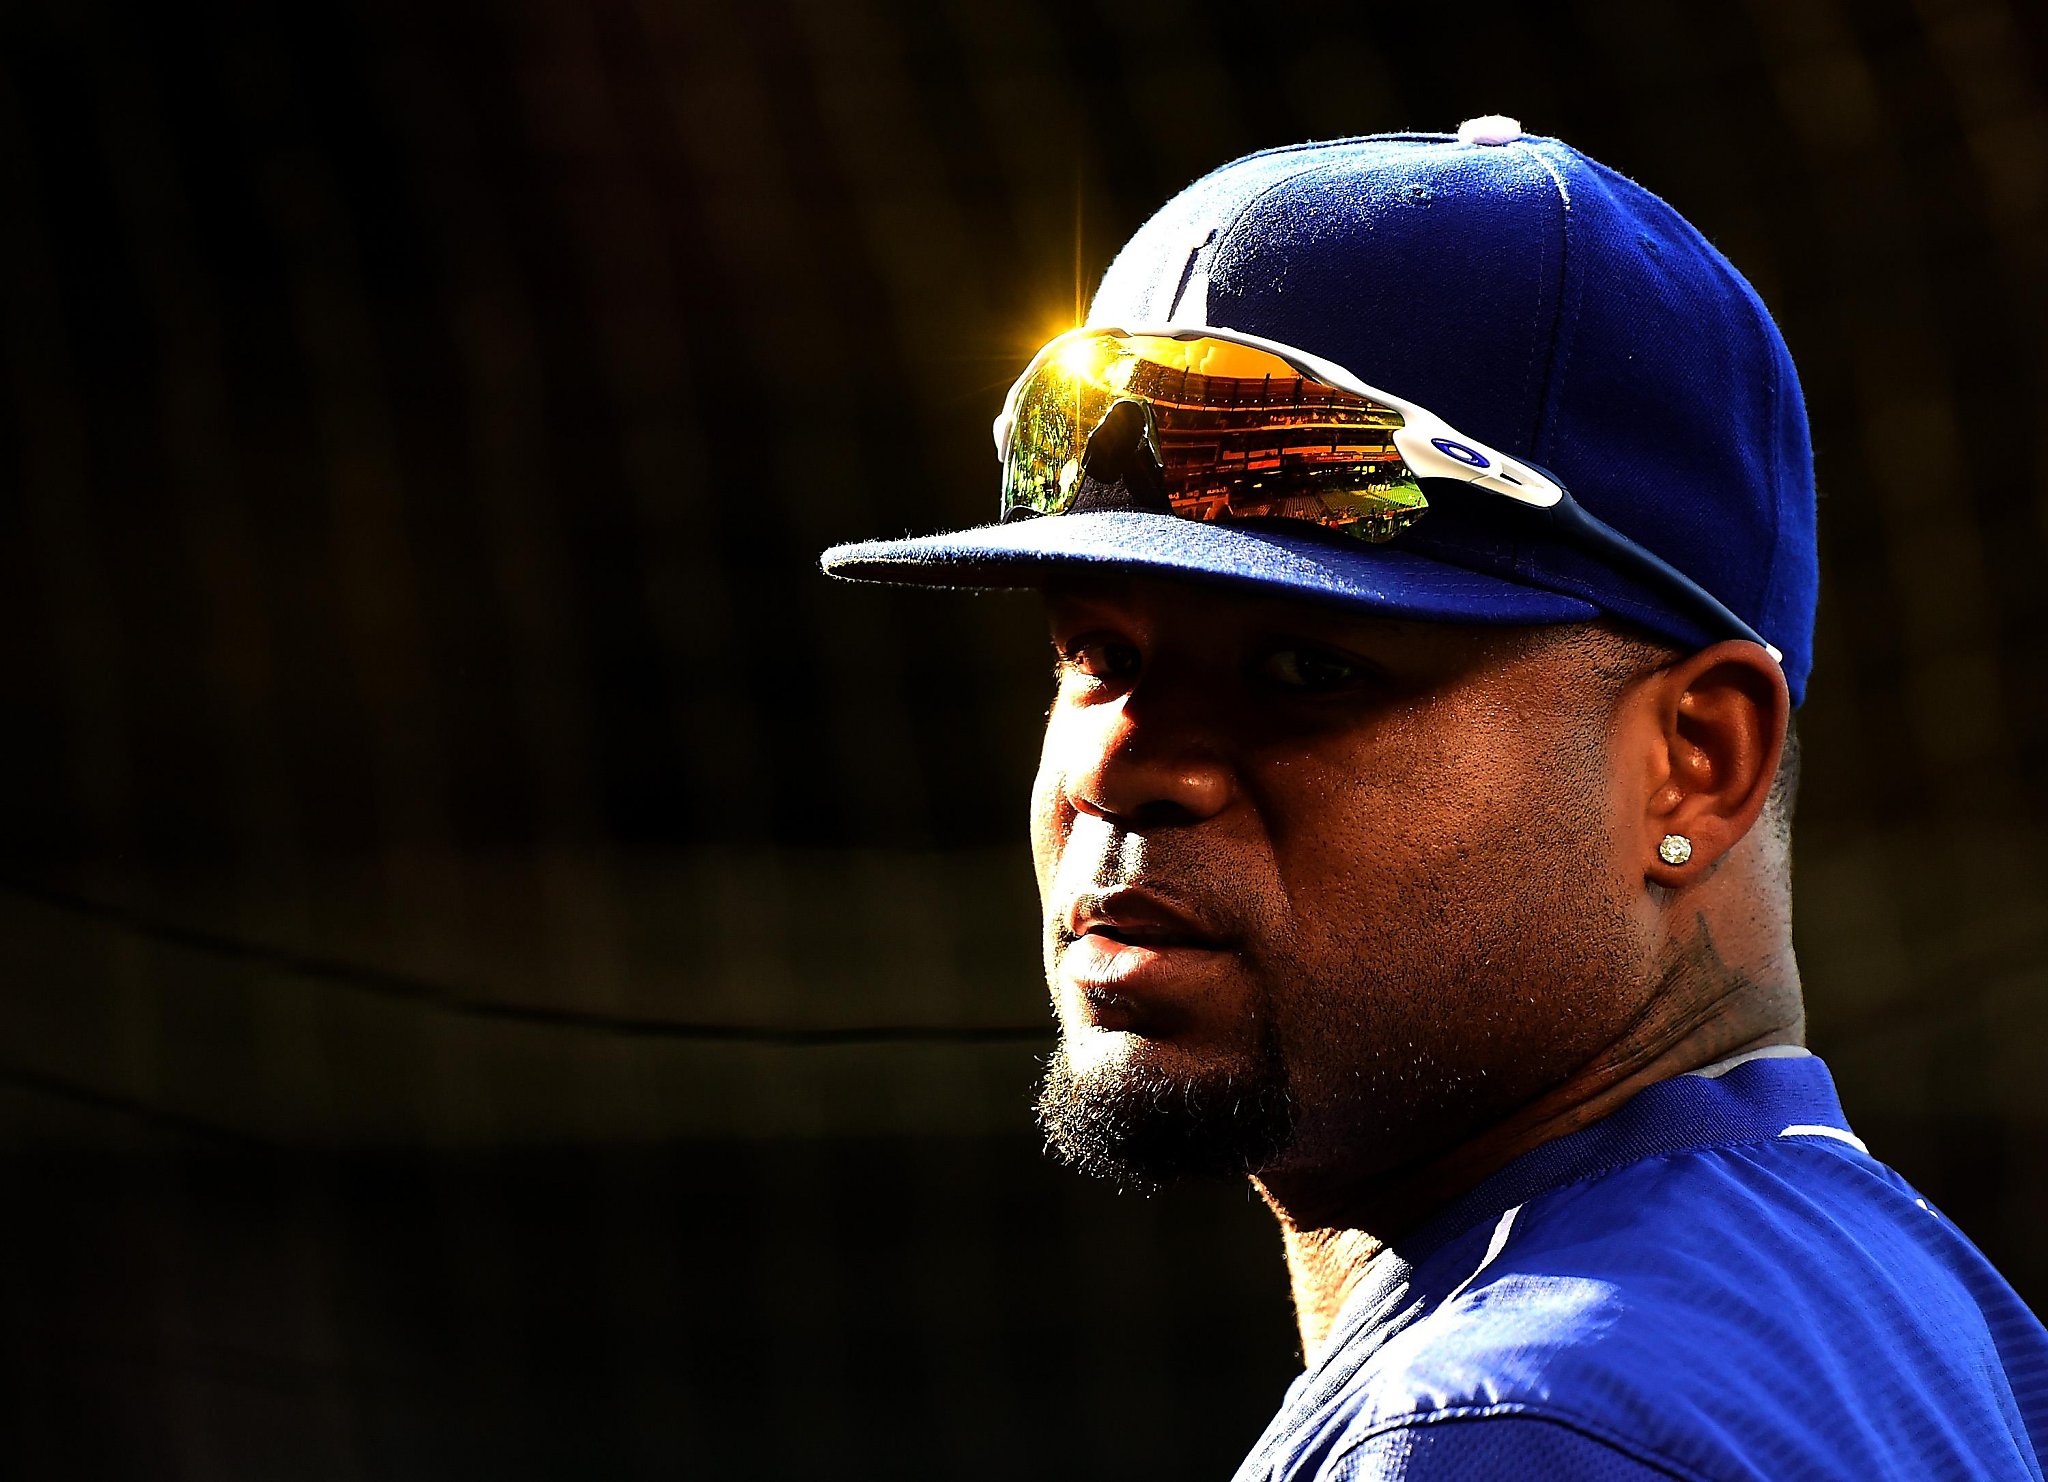 Woman, 25, and boy, 5, drown in ex-LA Dodgers star Carl Crawford's